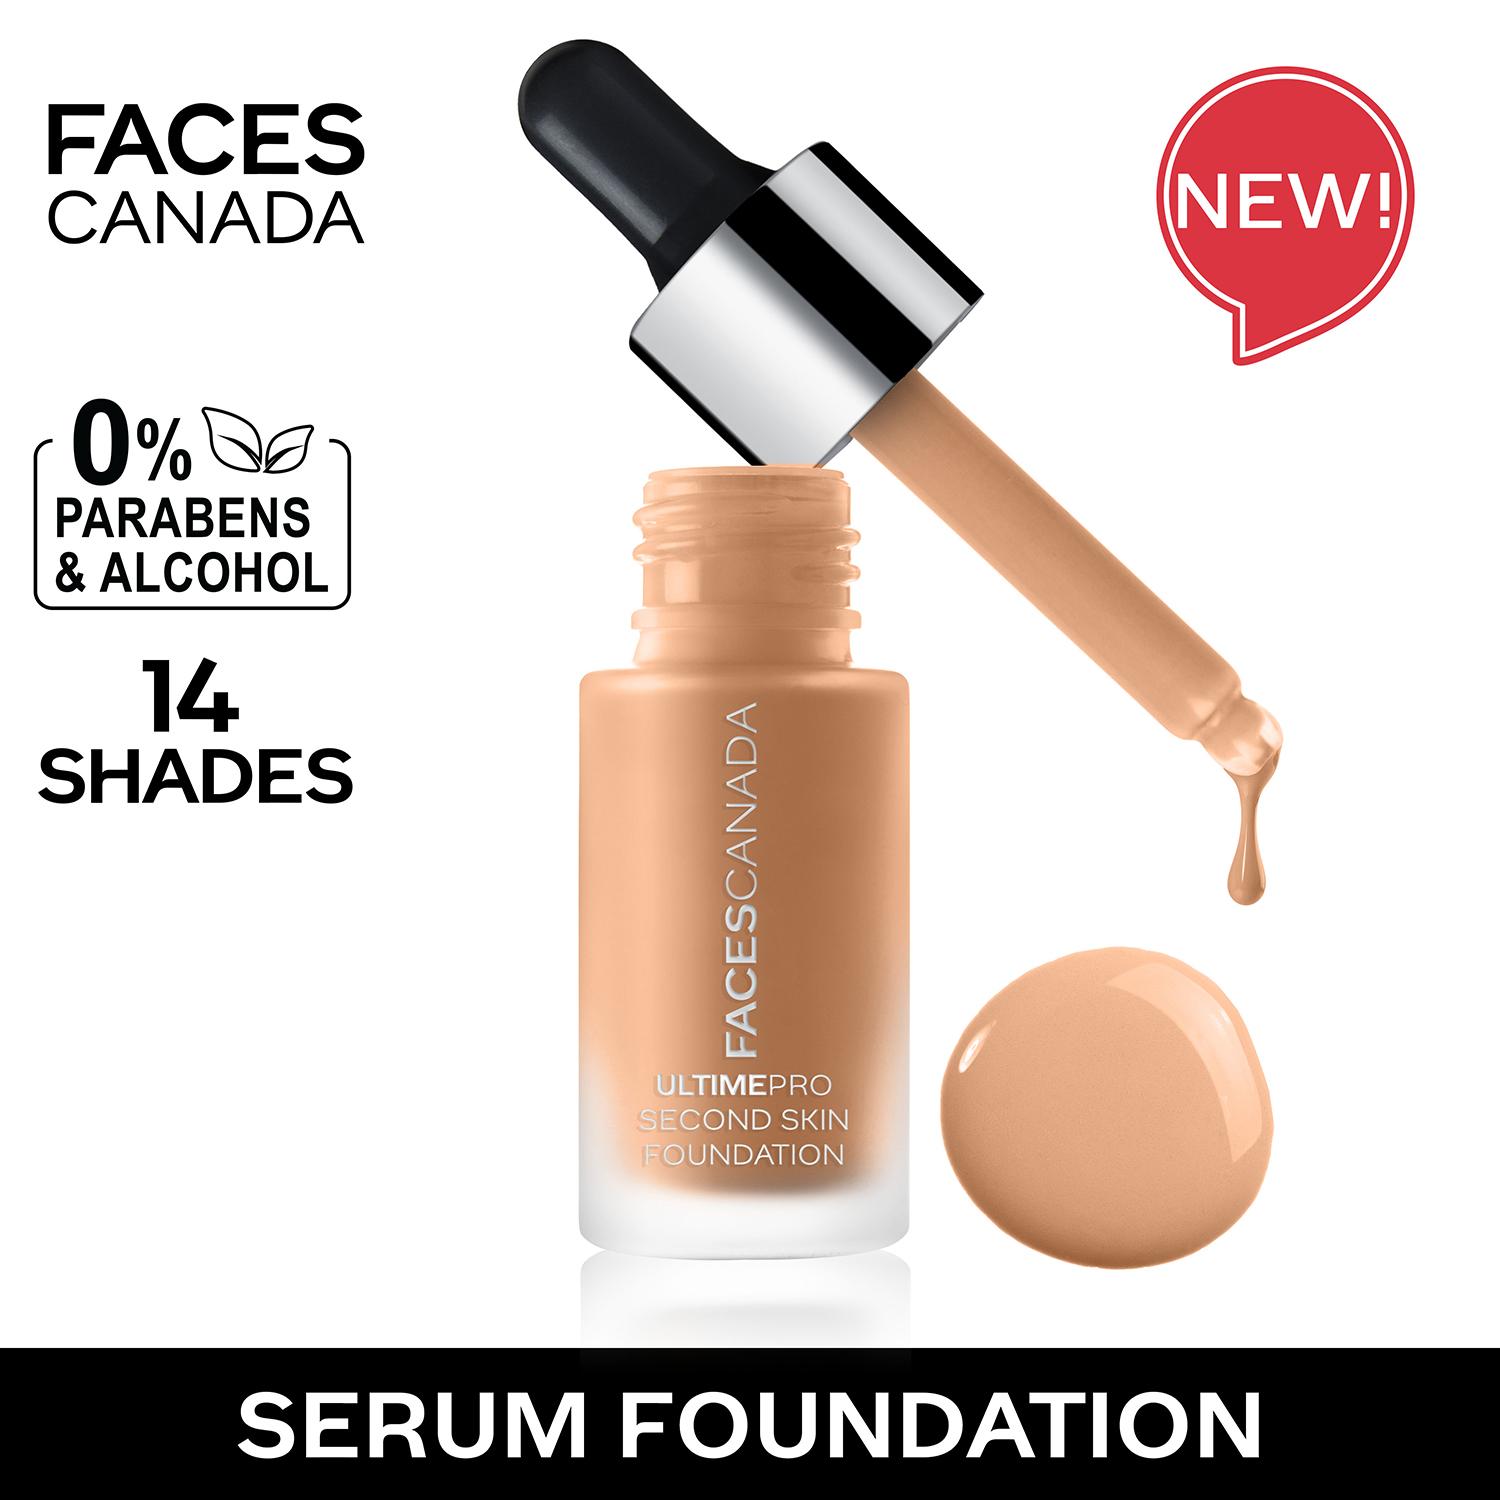 Faces Canada | Faces Canada Ultime Pro Second Skin Foundation - Rich Ivory 013, Matte Finish, SPF 15 (15 ml)